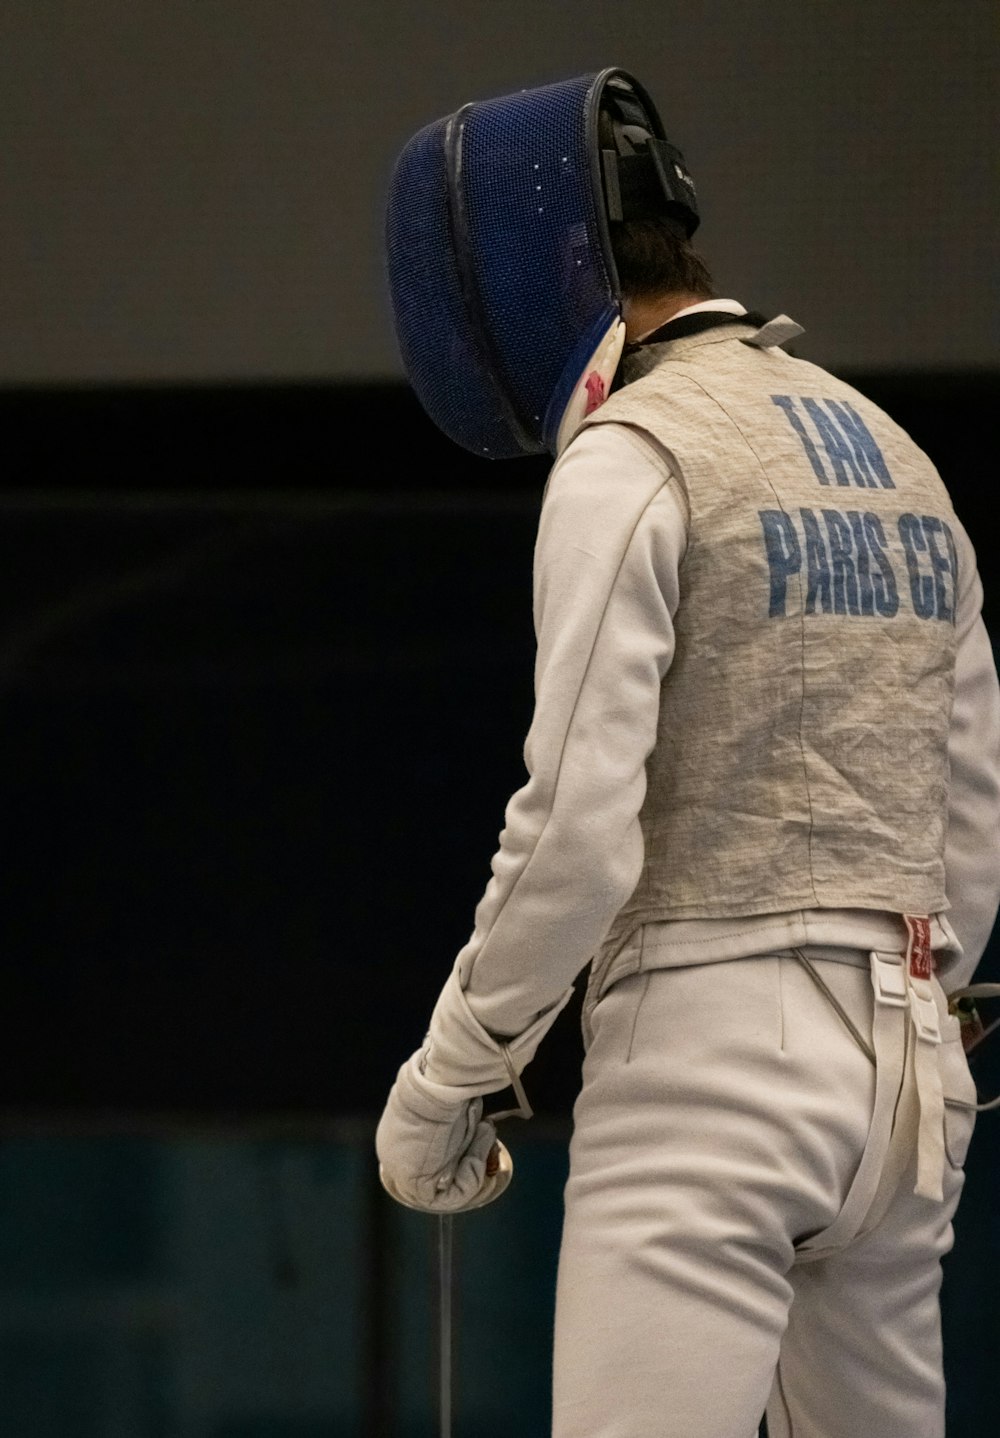 a man wearing a helmet and white pants